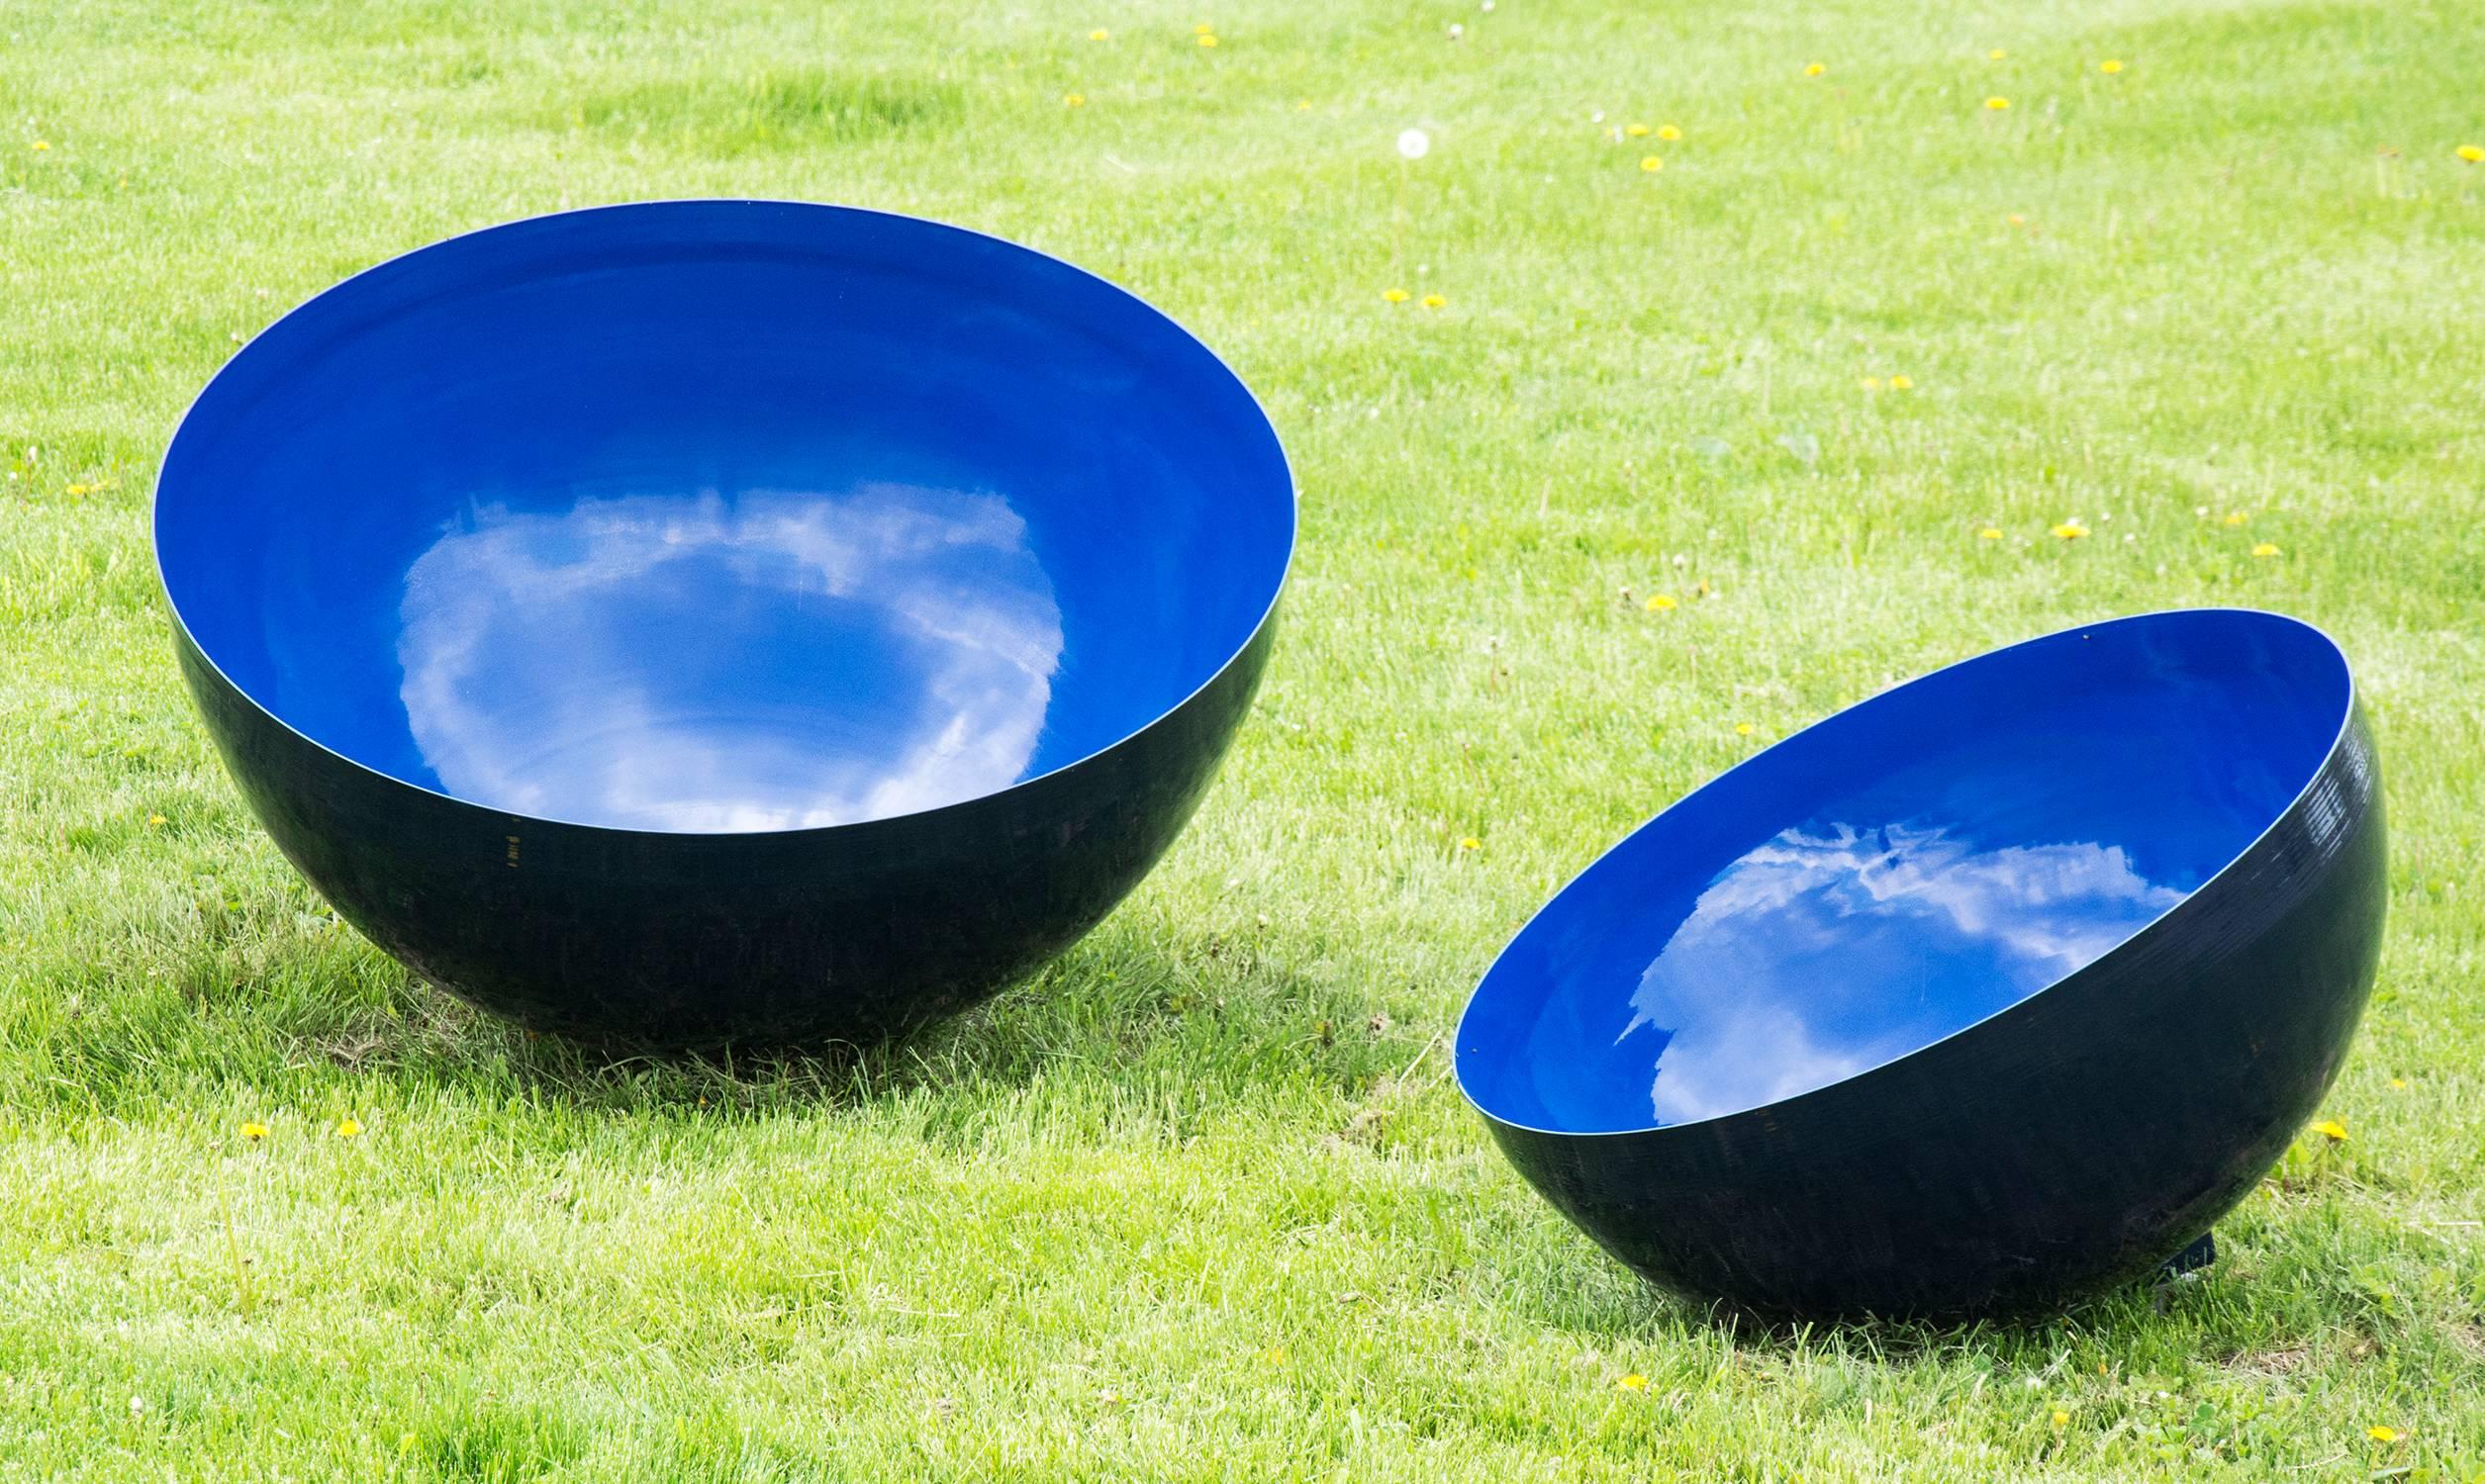 Singing Bowl Ultramarine Sky Large - painted stainless steel garden sculpture - Contemporary Sculpture by Marlene Hilton Moore